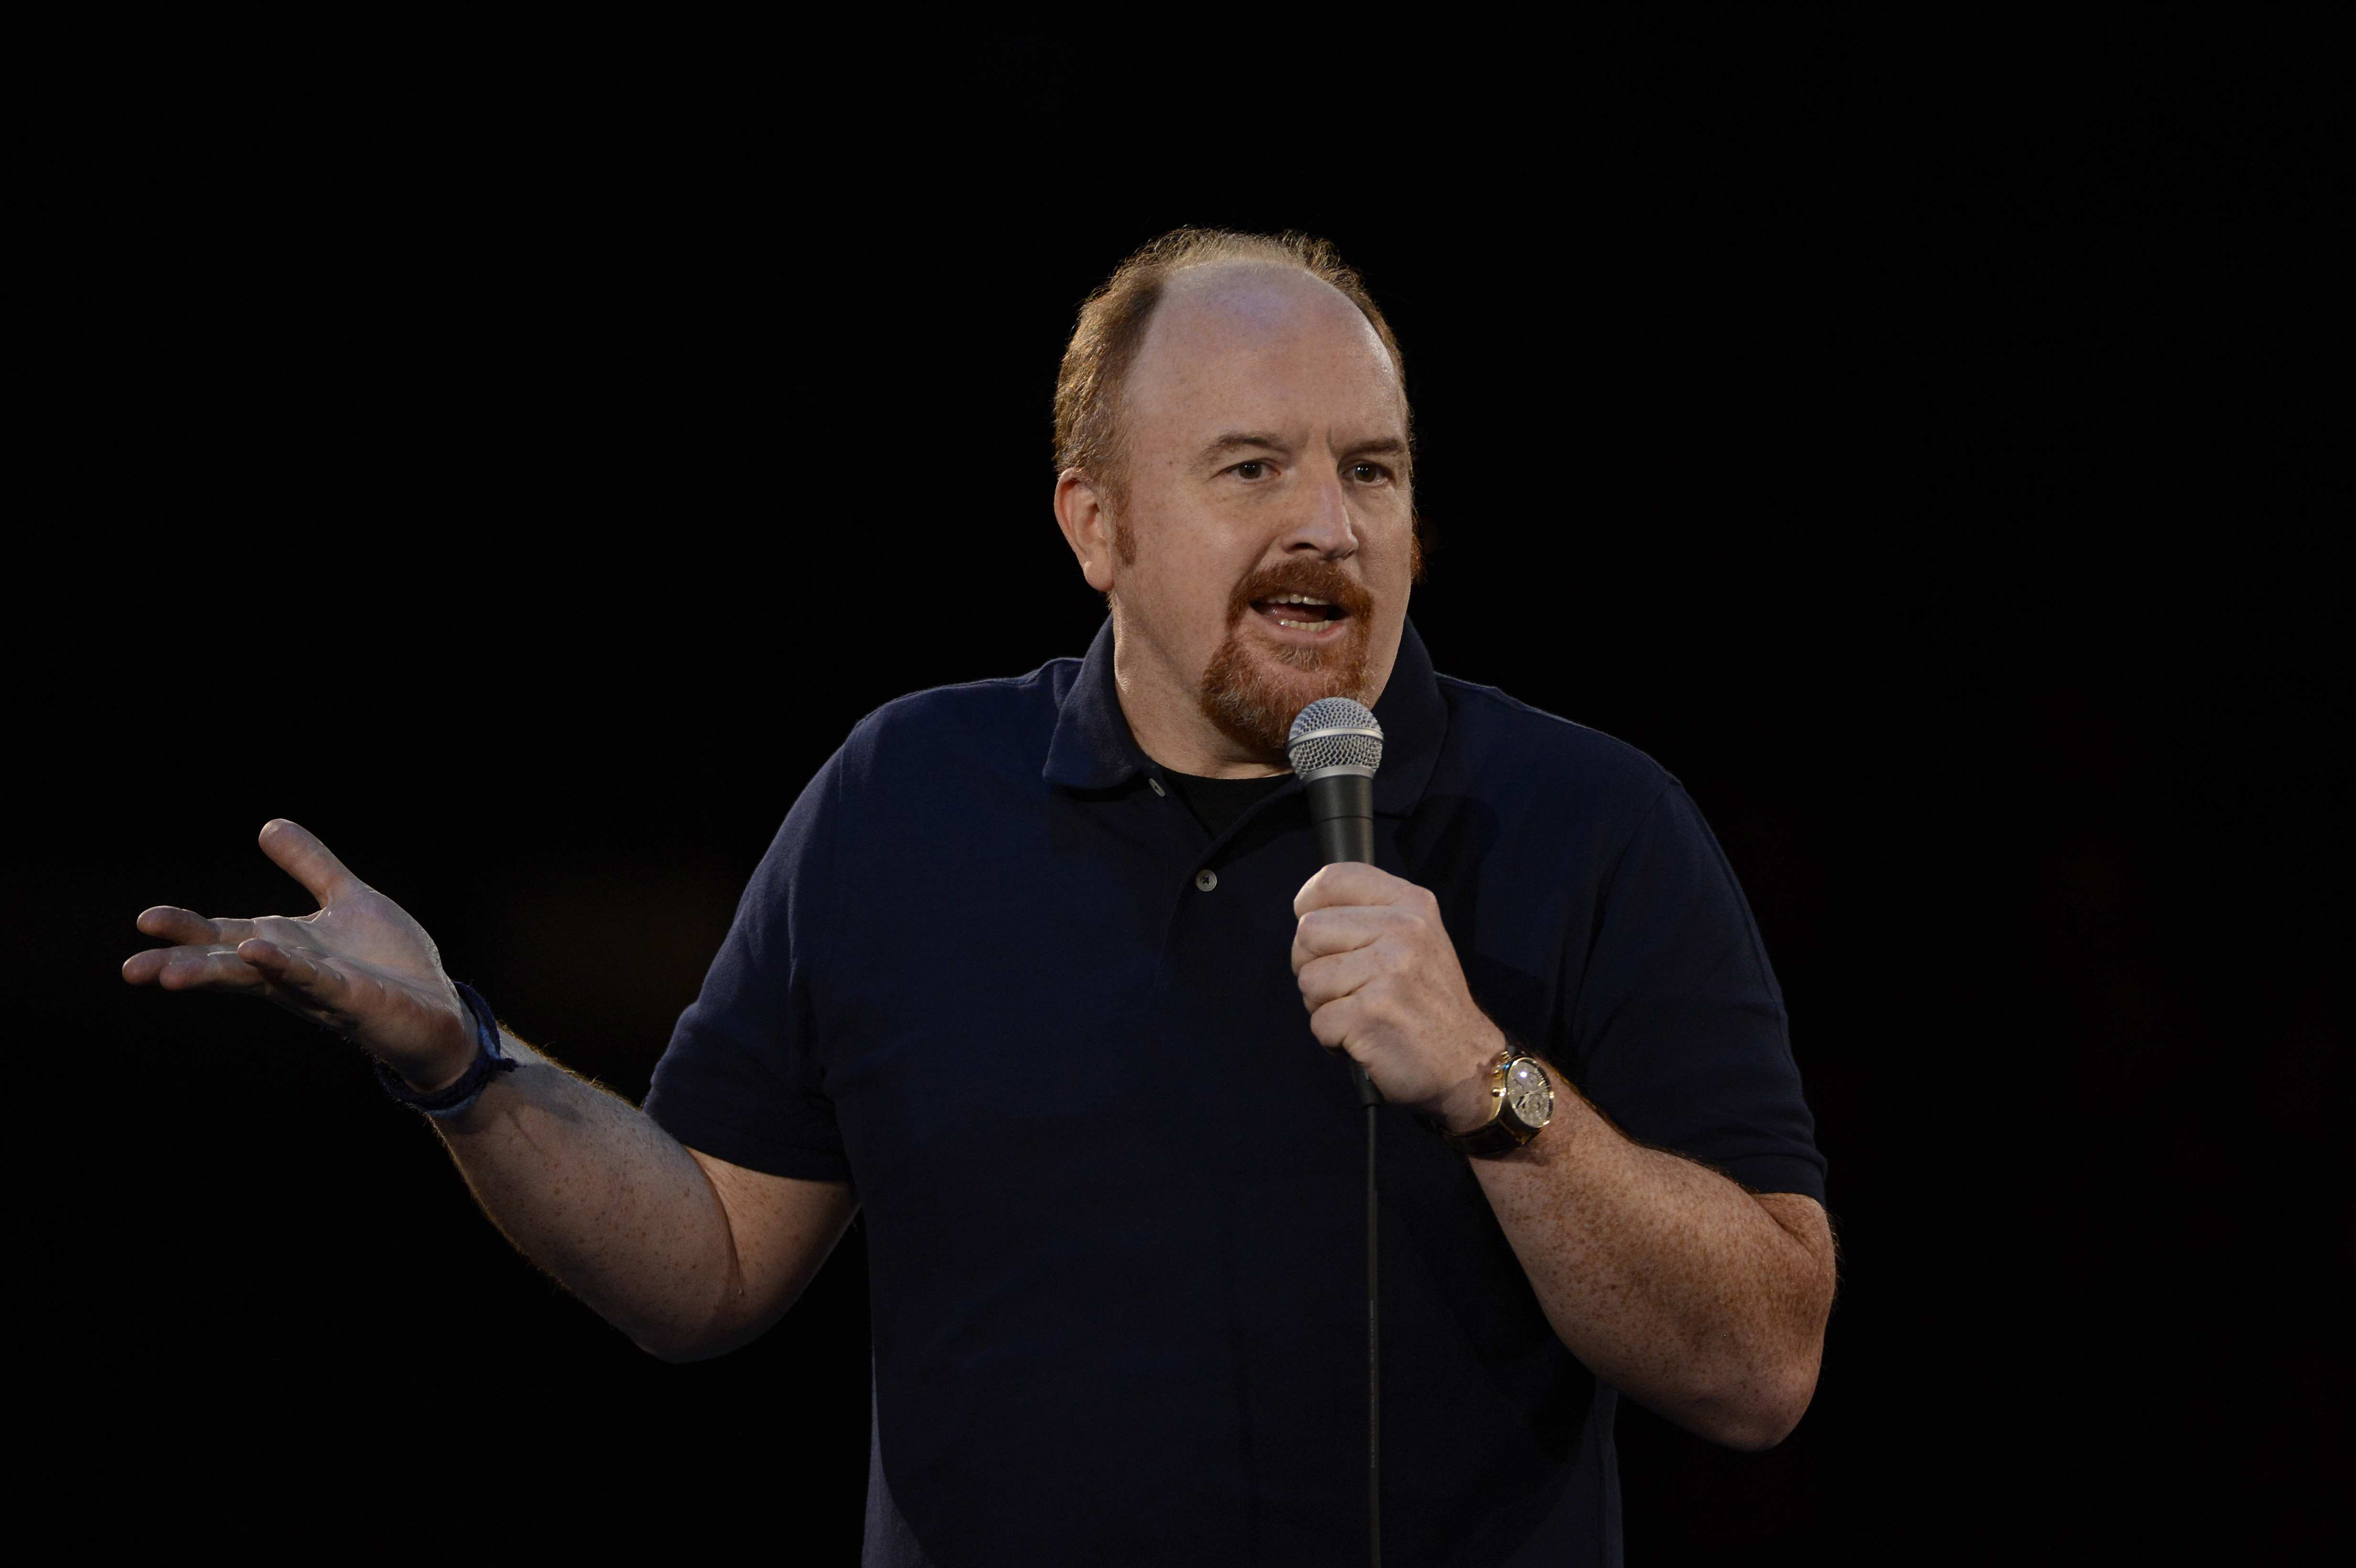 Louis CK Chewed UP clip PREMIERES on SHOWTIME OCT. 4 at 11PM 